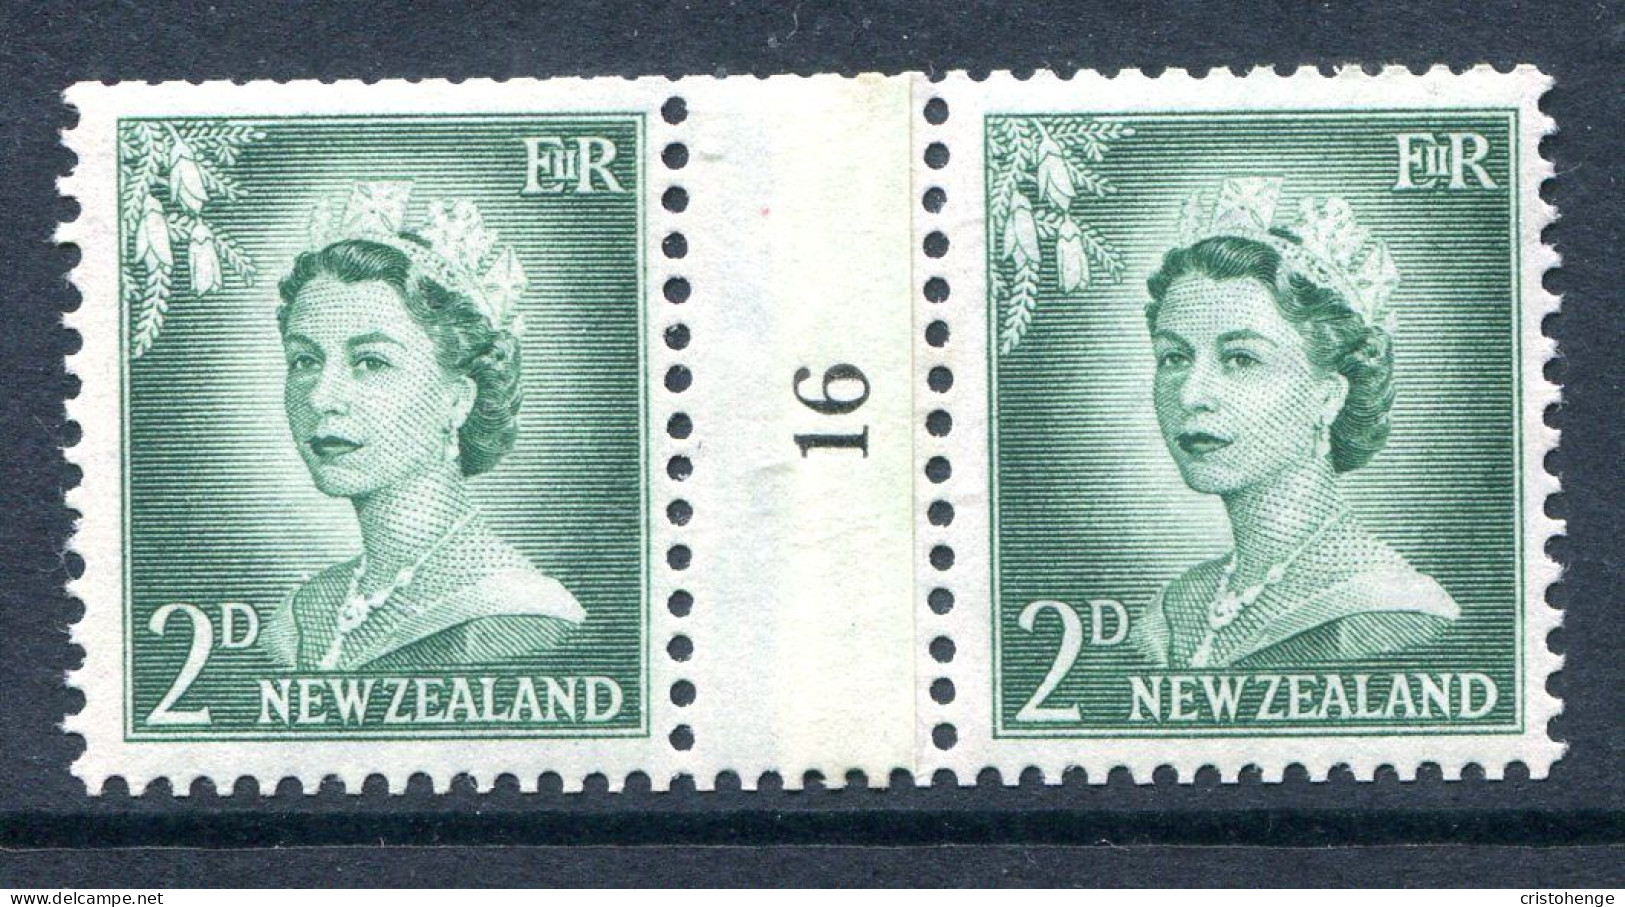 New Zealand 1955-59 QEII Large Figure Definitives - Coil Pairs - 2d Bluish-green - No. 16 - LHM - Unused Stamps